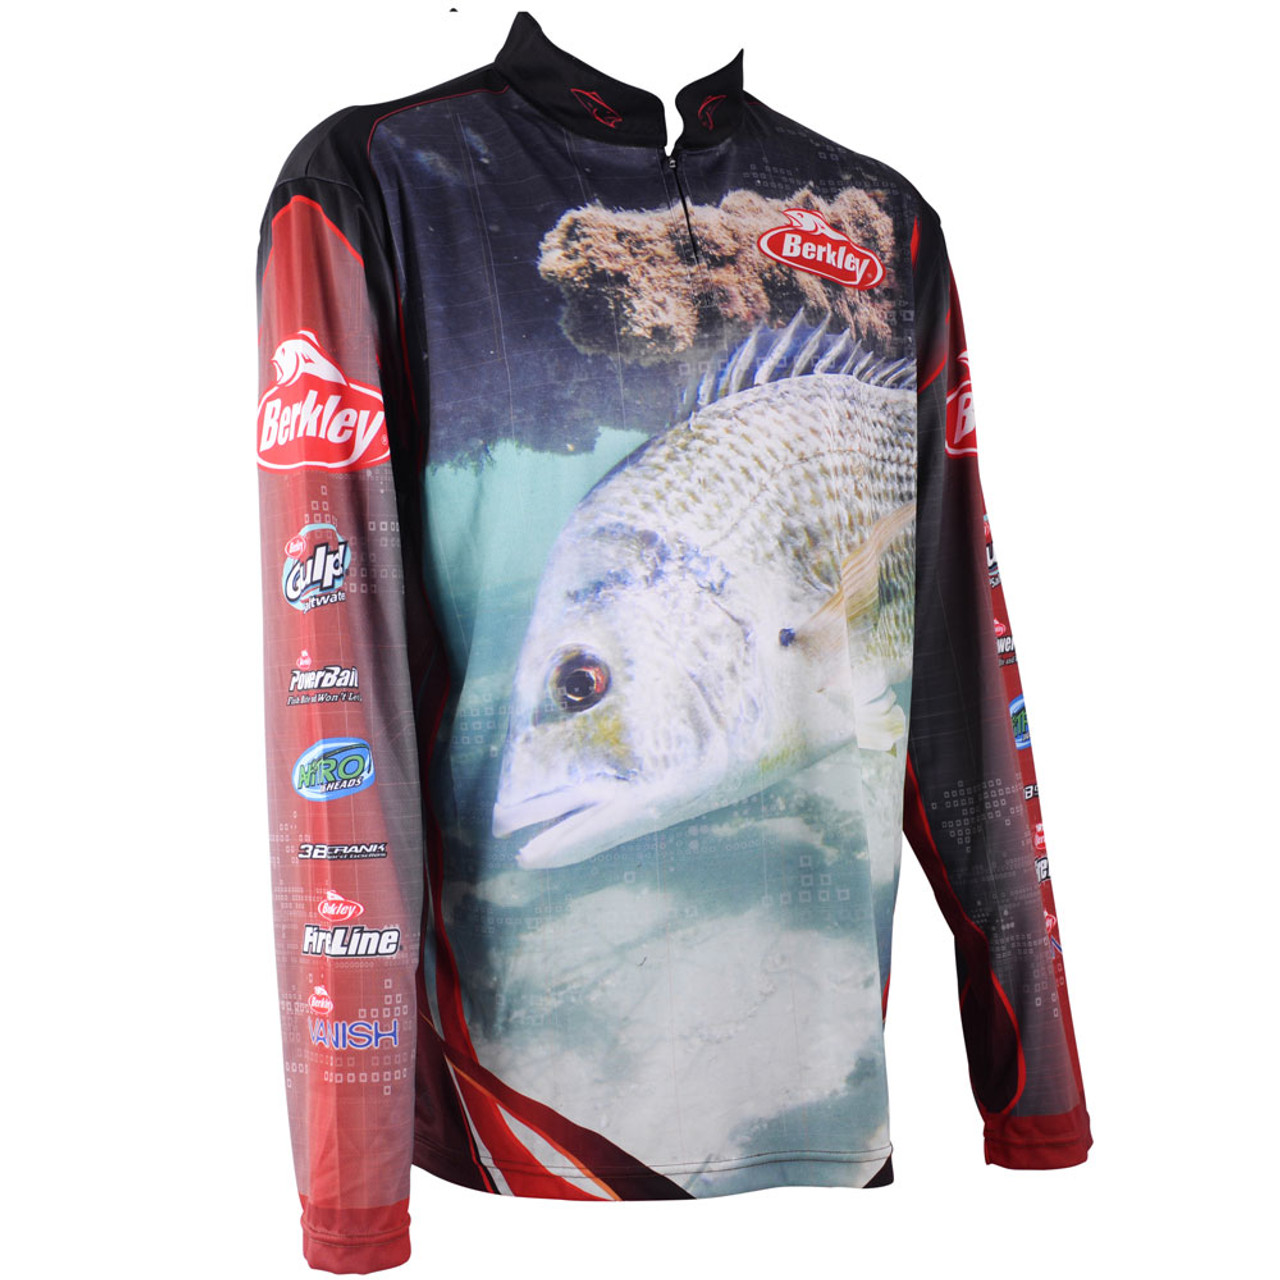 Buy Outlet Berkley Fishing Apparel - Shirts online - reduction in